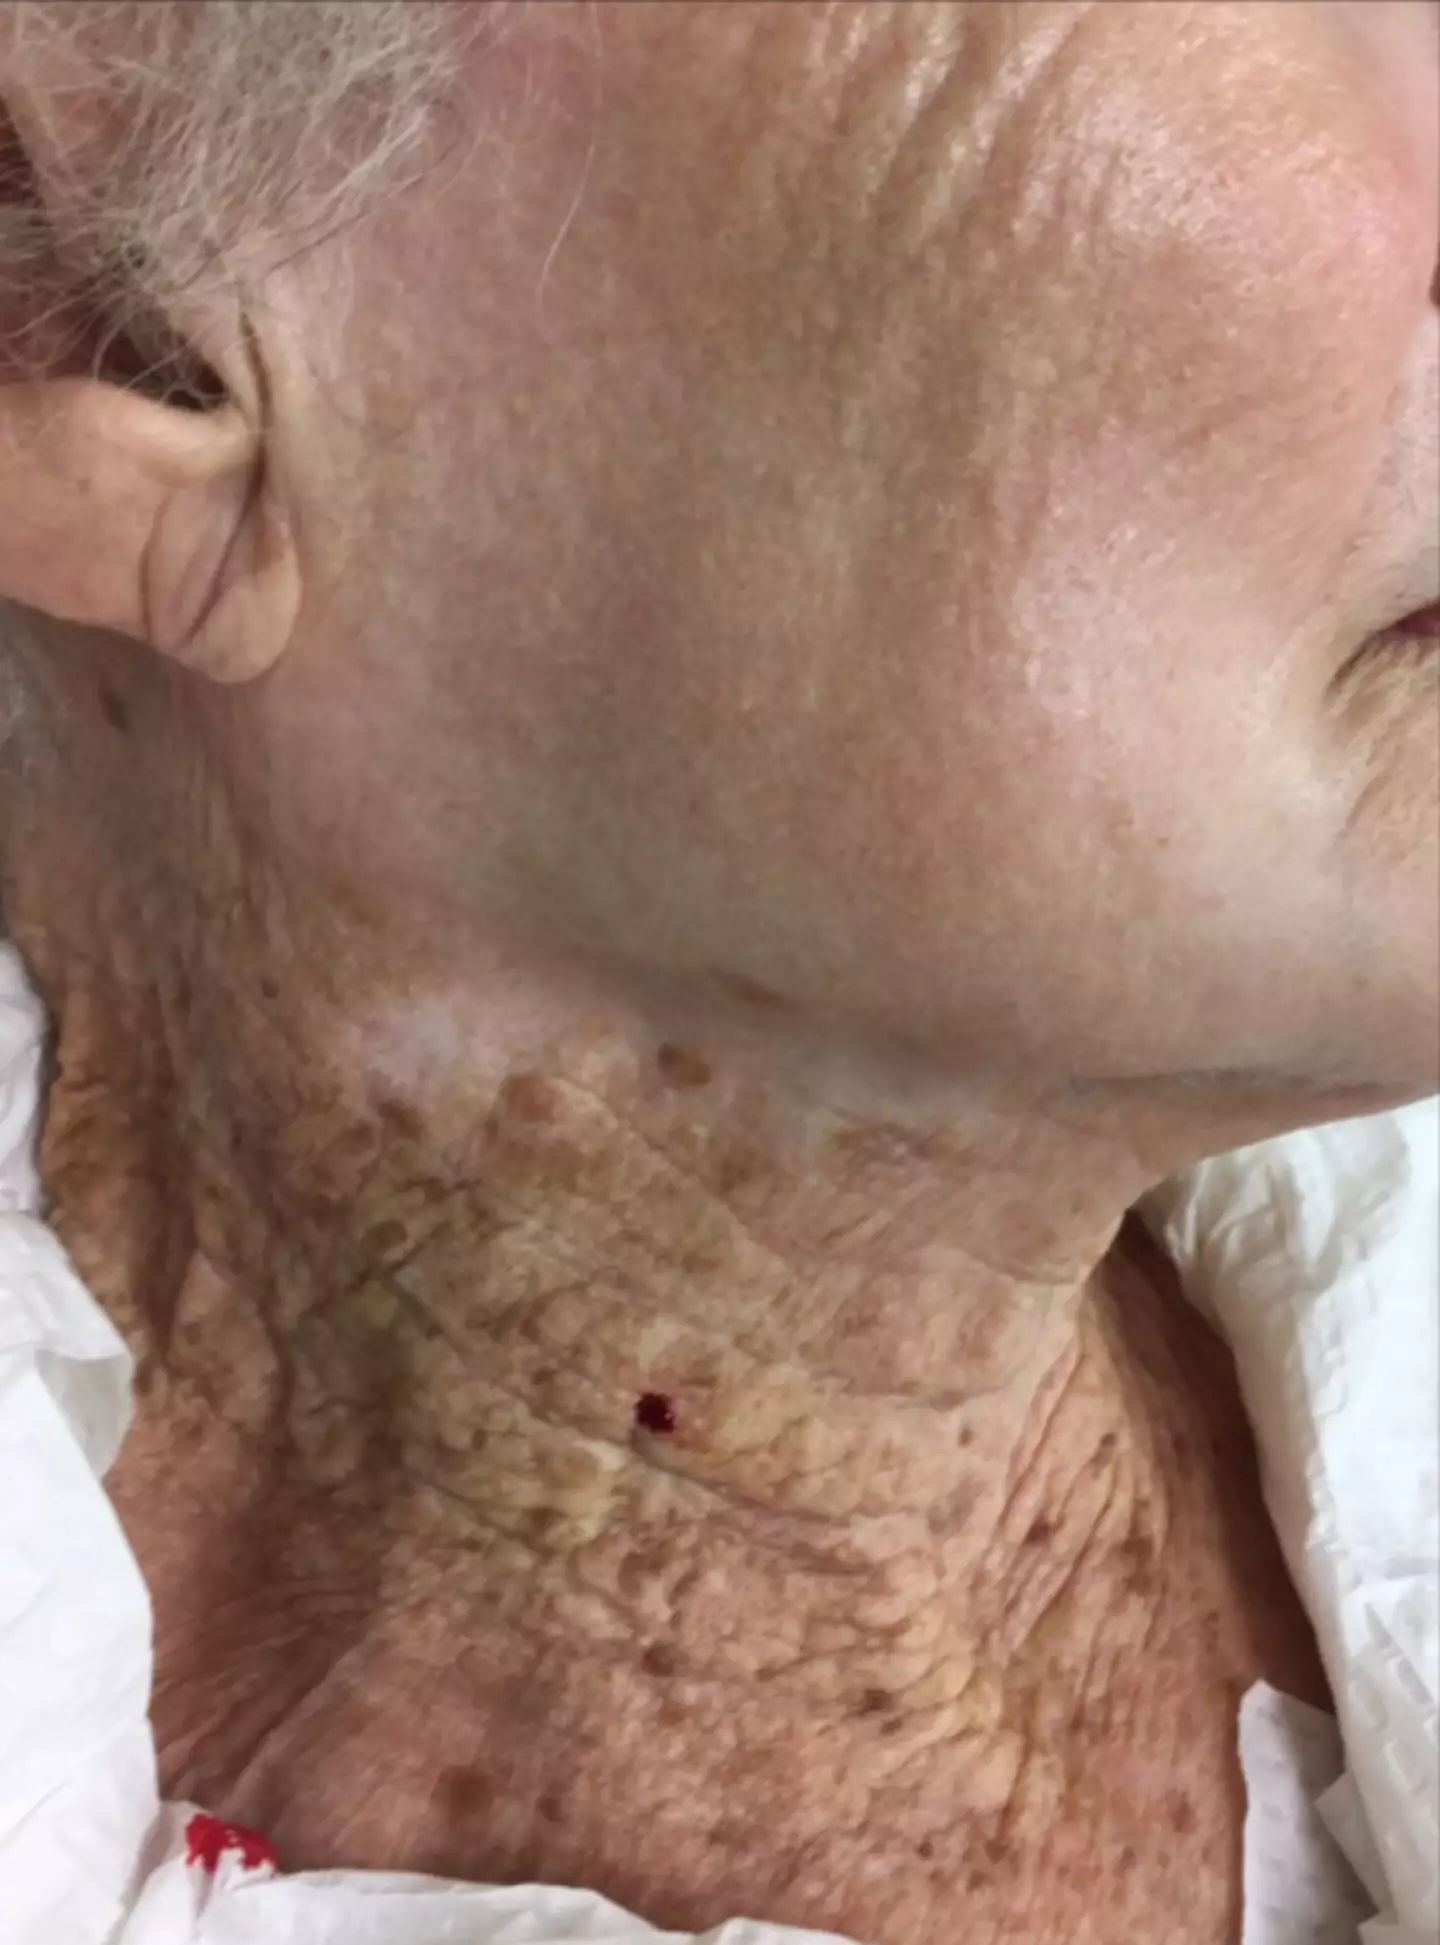 You can see the clear difference between the skin on her face and neck.